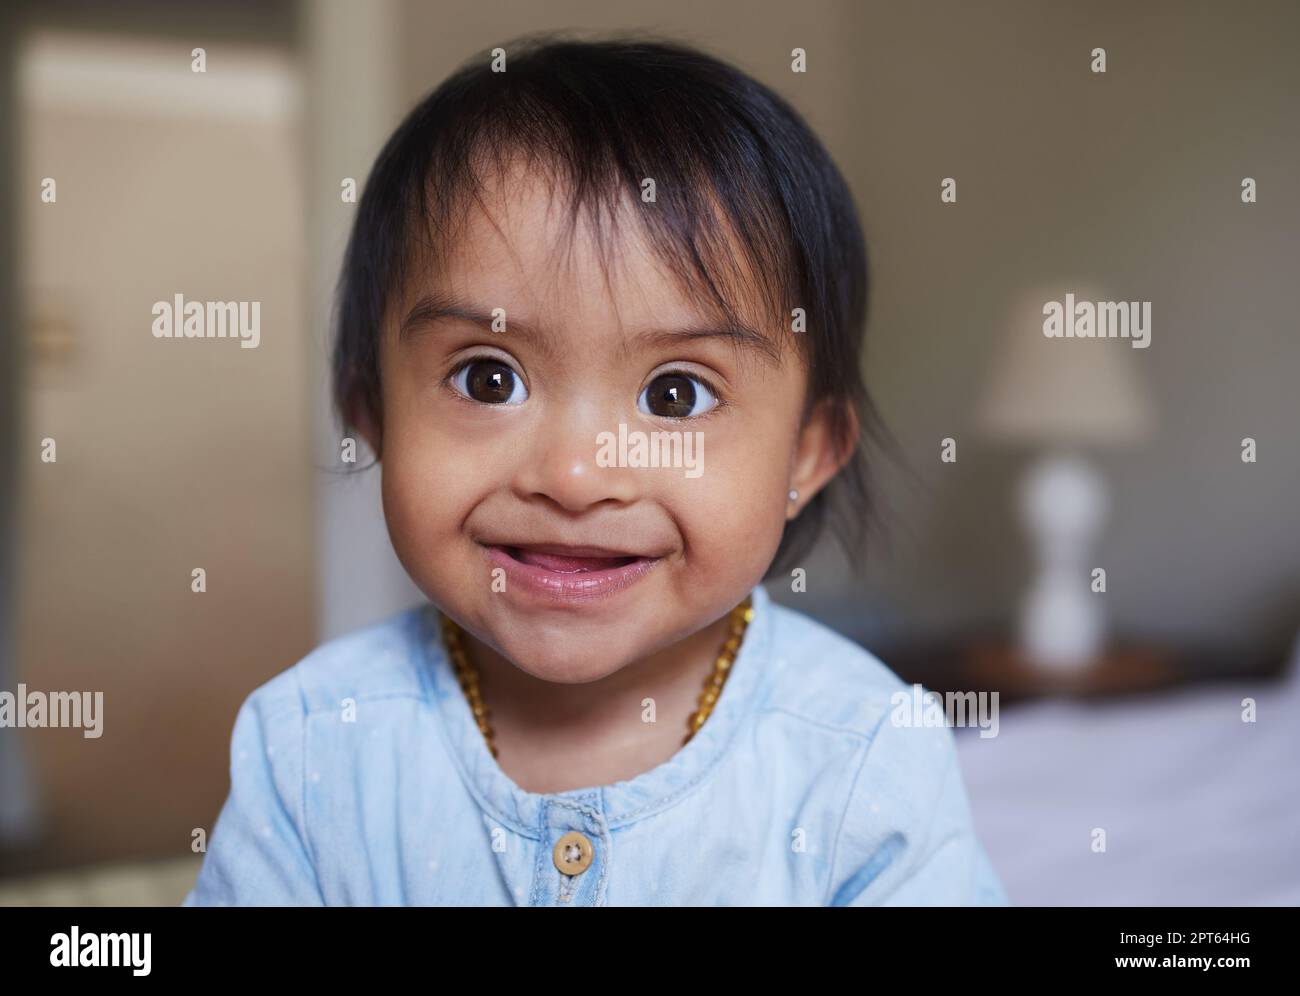 Happy, portrait smile and Down syndrome baby relaxing on a bed in happiness at home. Cheerful little child with genetic disorder or disability smiling Stock Photo